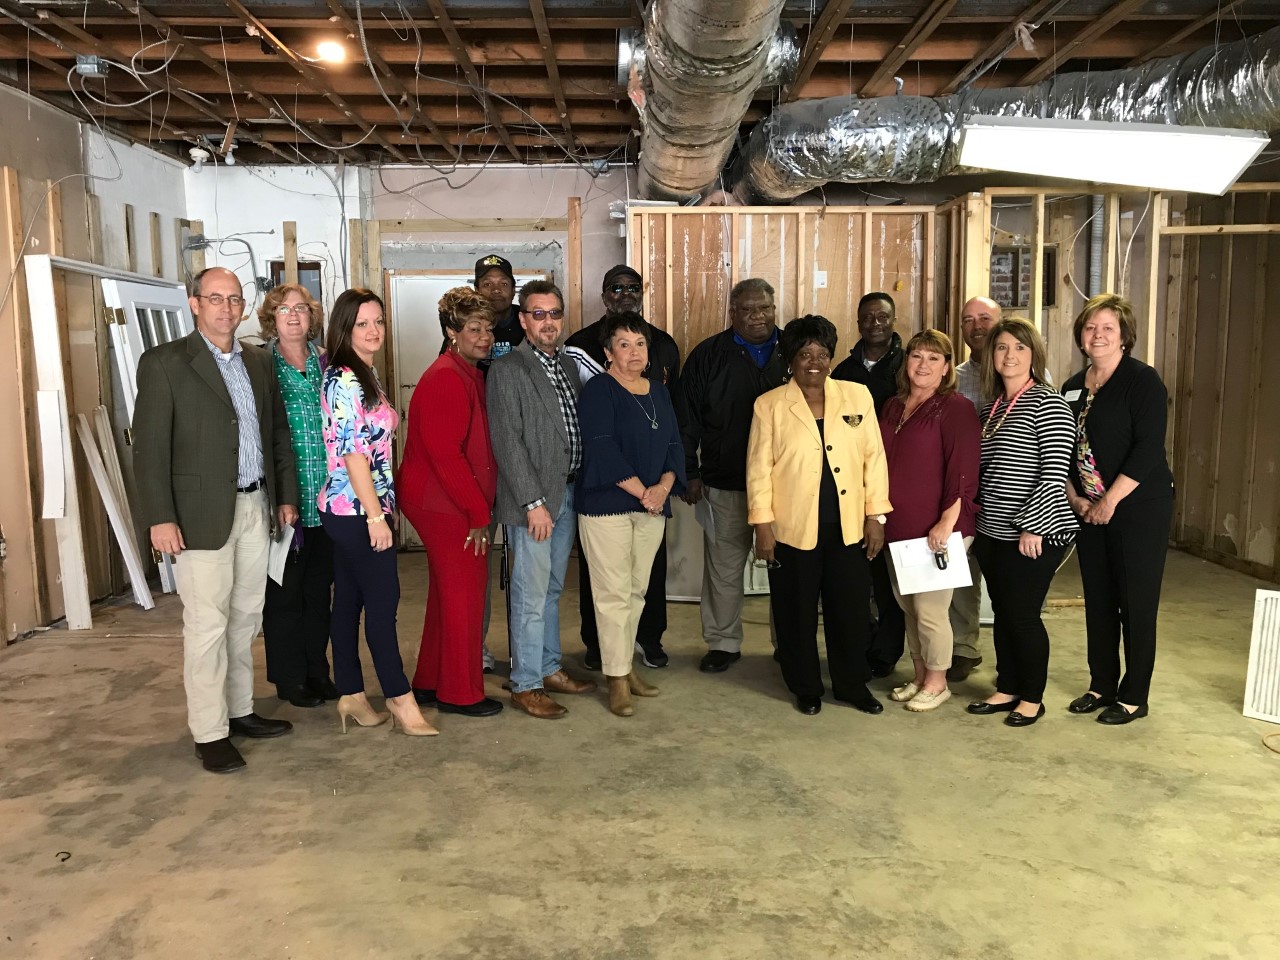 Pictured are representatives from the Jones County Community Foundation board of advisors and nonprofit organizations receiving disaster relief grants.